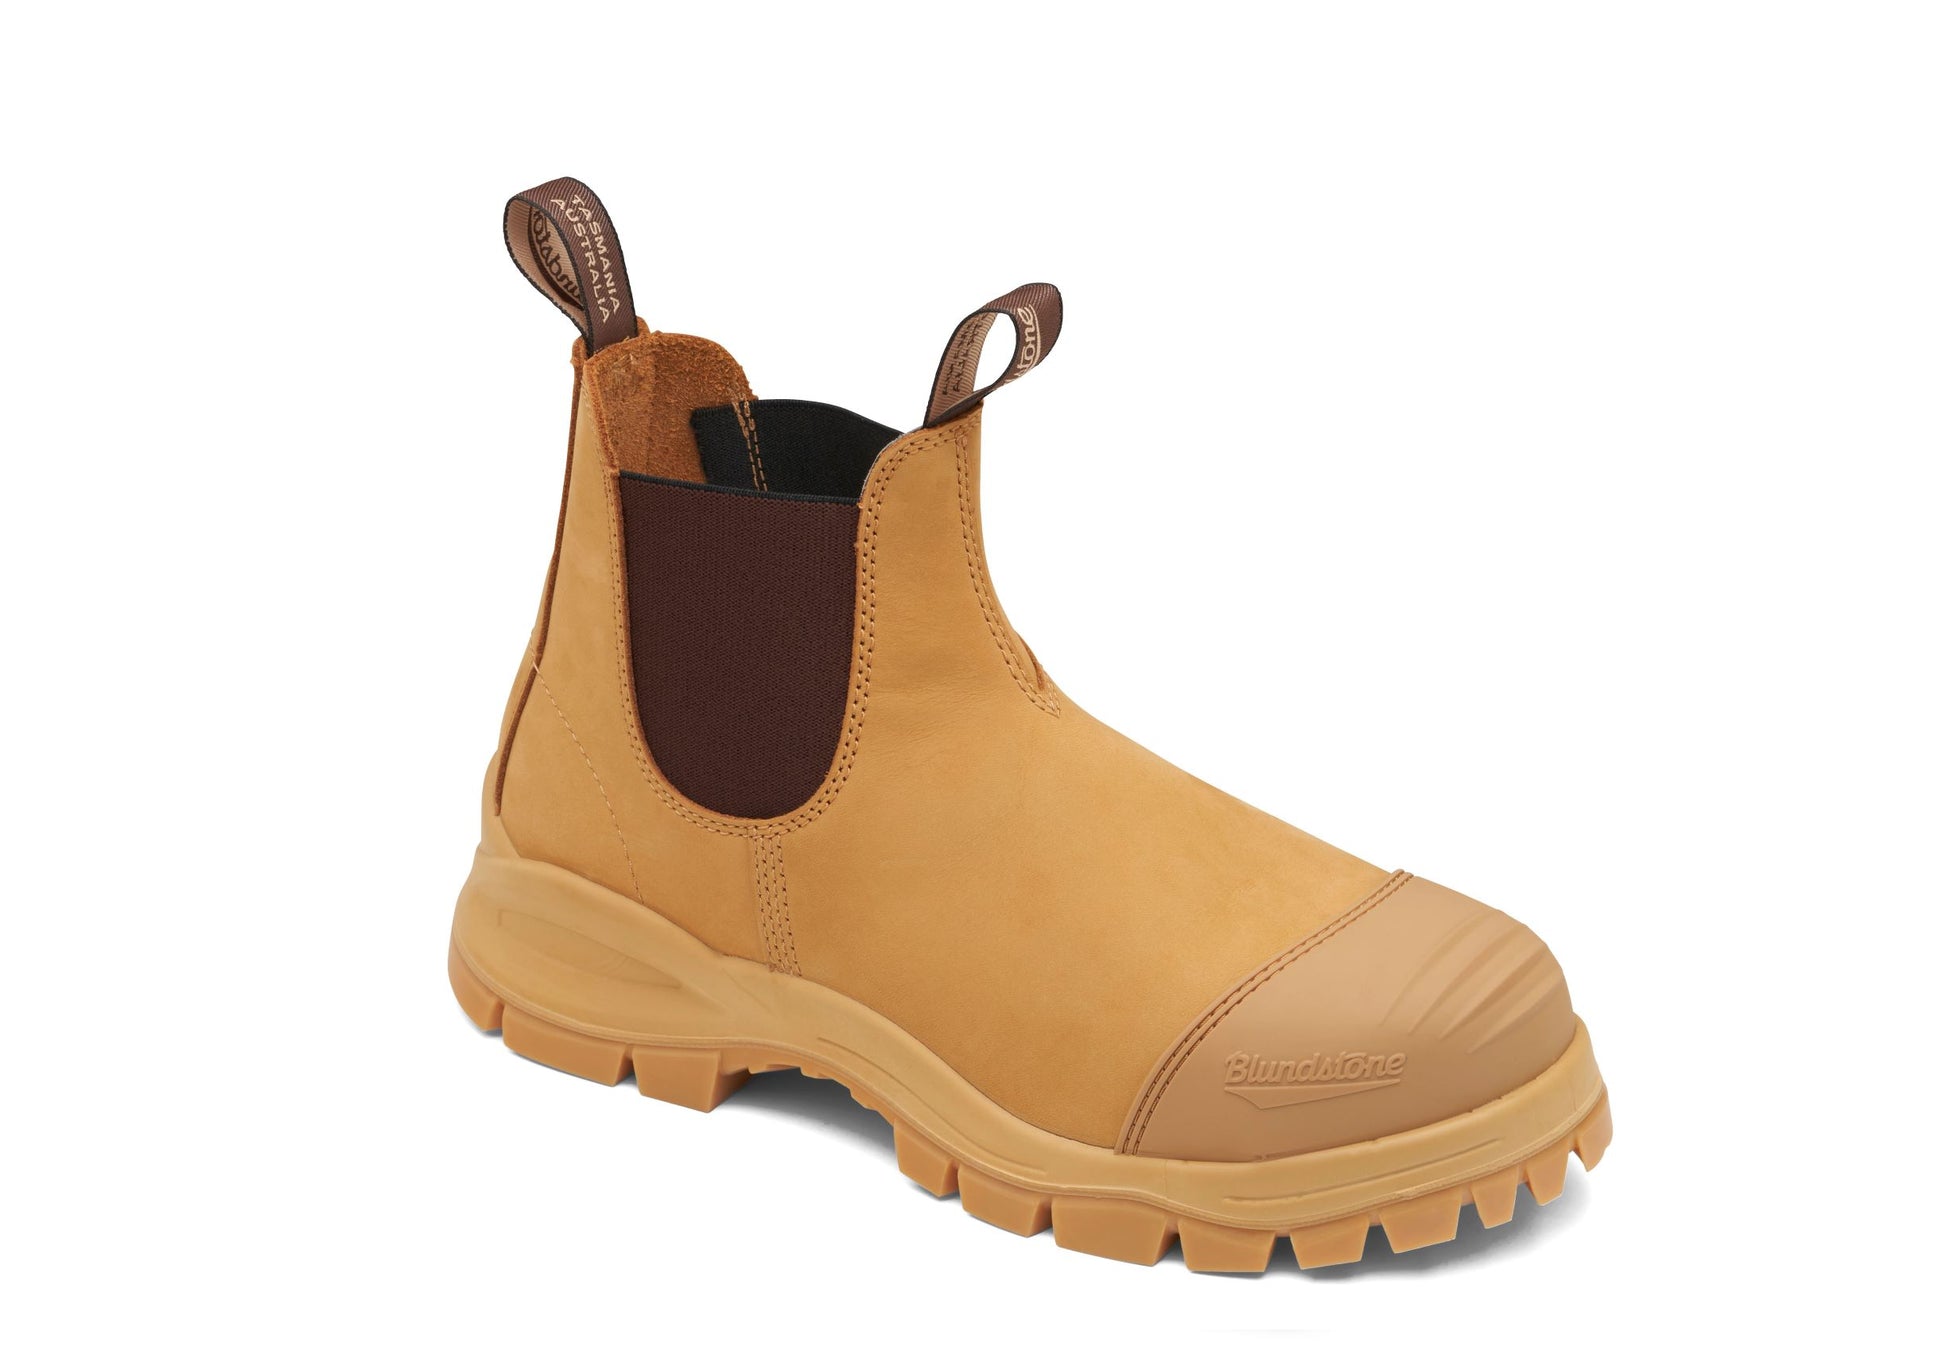 Blundstone pull on boot